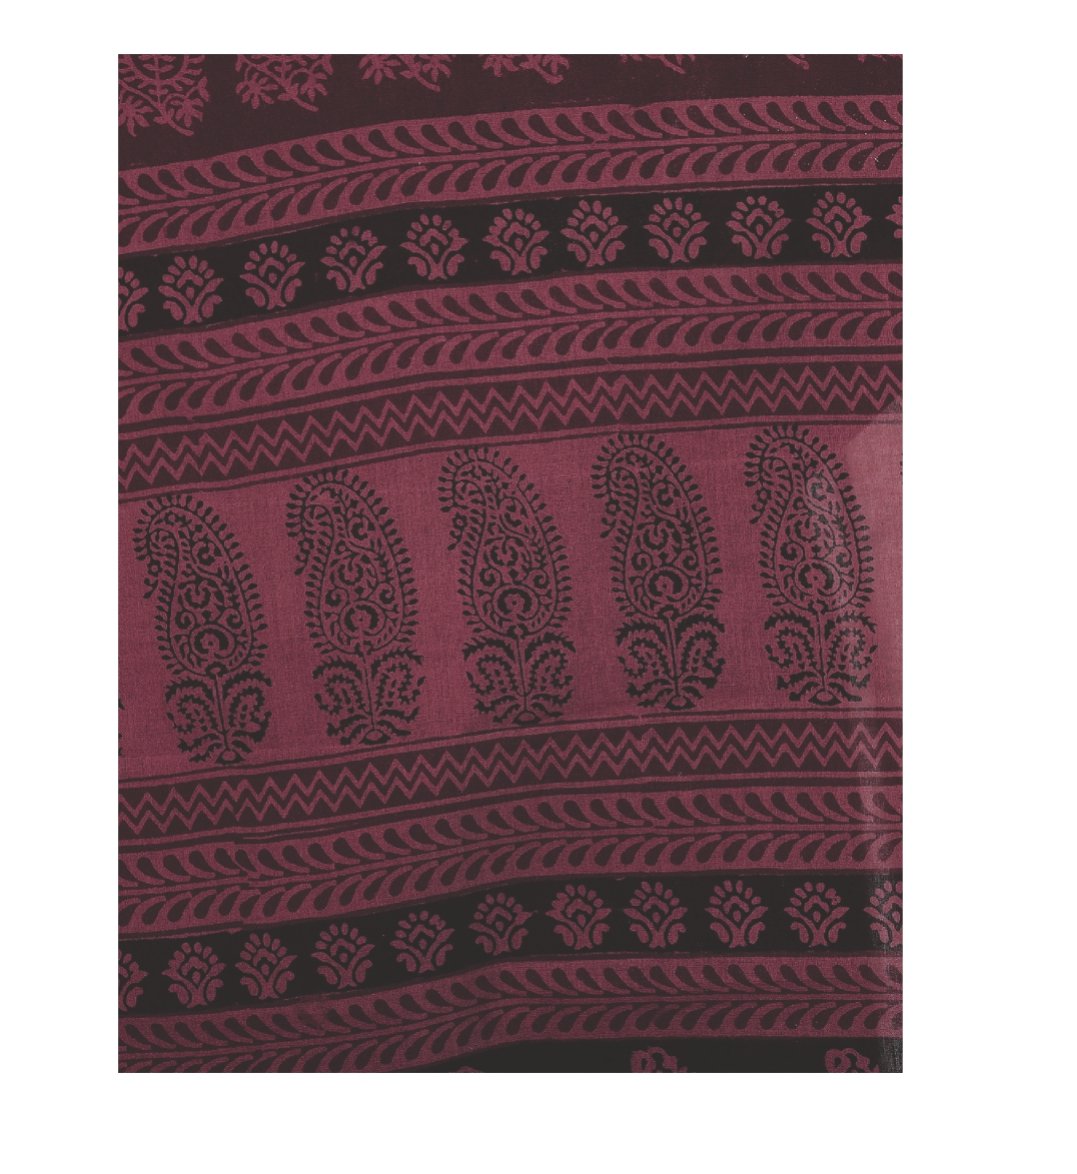 Maroon & Black Cotton Hand Block Bagh Print Handcrafted Saree-Saree-Kalakari India-ZIBASA0035-Bagh, Cotton, Geographical Indication, Hand Blocks, Hand Crafted, Heritage Prints, Natural Dyes, Sarees, Sustainable Fabrics-[Linen,Ethnic,wear,Fashionista,Handloom,Handicraft,Indigo,blockprint,block,print,Cotton,Chanderi,Blue, latest,classy,party,bollywood,trendy,summer,style,traditional,formal,elegant,unique,style,hand,block,print, dabu,booti,gift,present,glamorous,affordable,collectible,Sari,Saree,pr